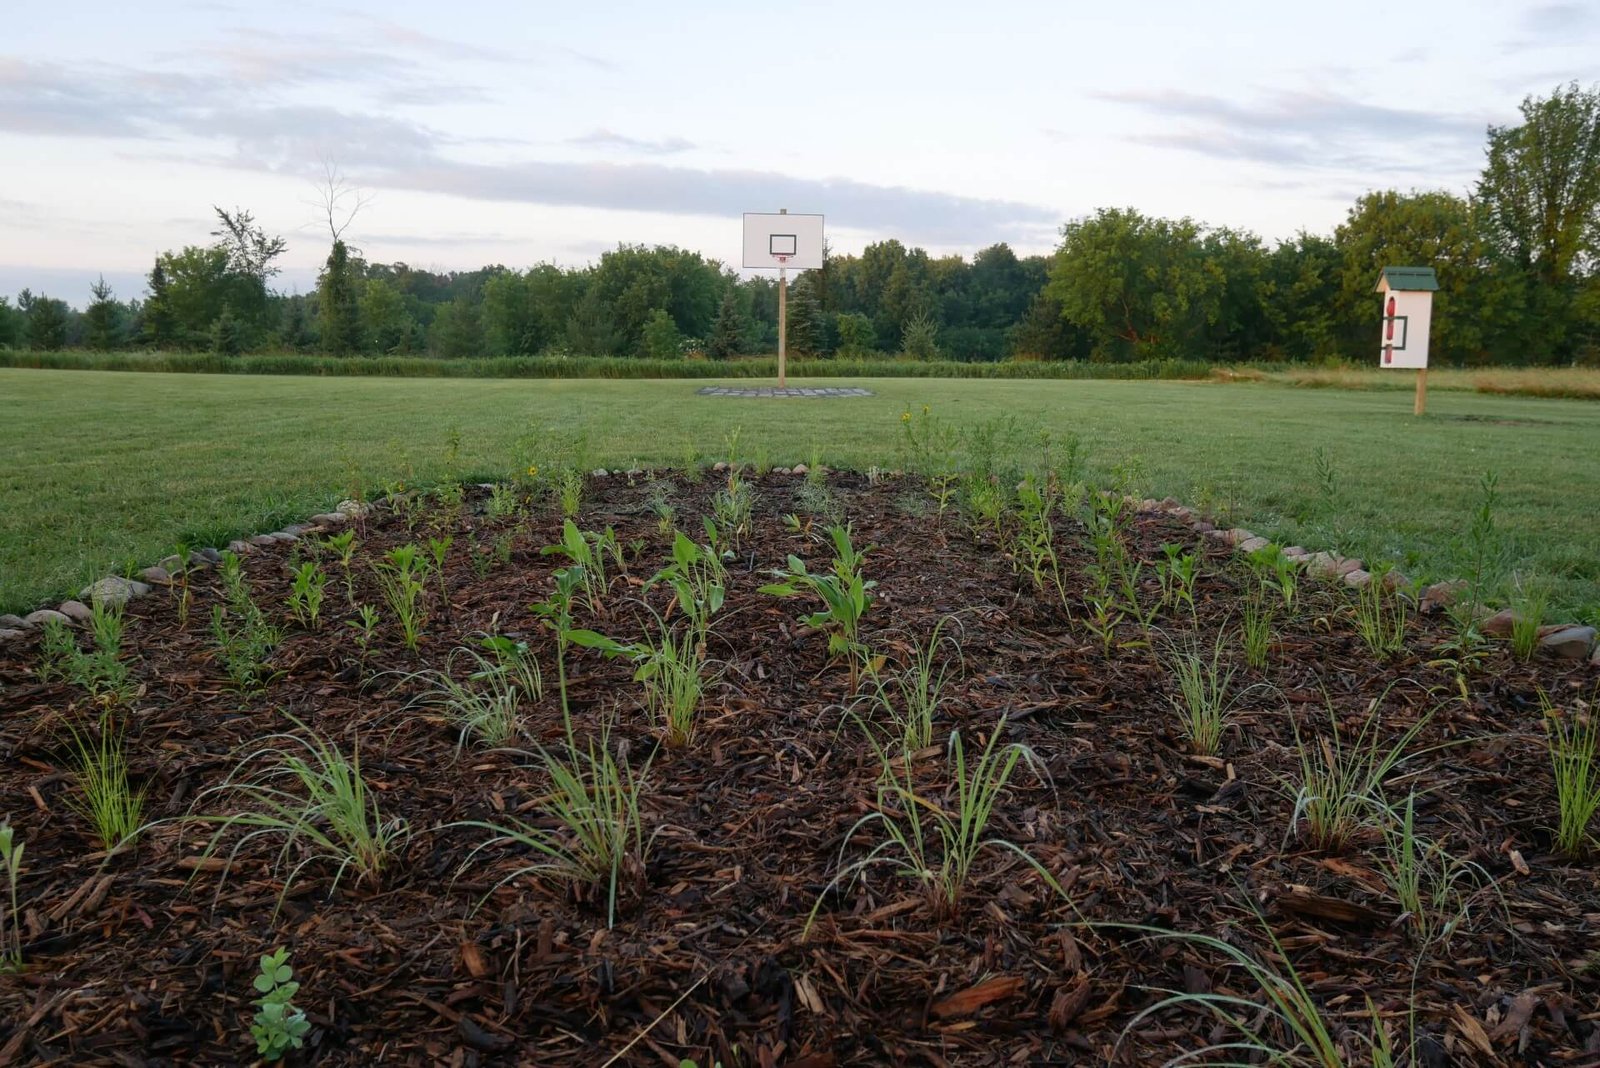 rows of plants in the shape of a basketball free throw lane face a concrete lane and a basketball hoop.